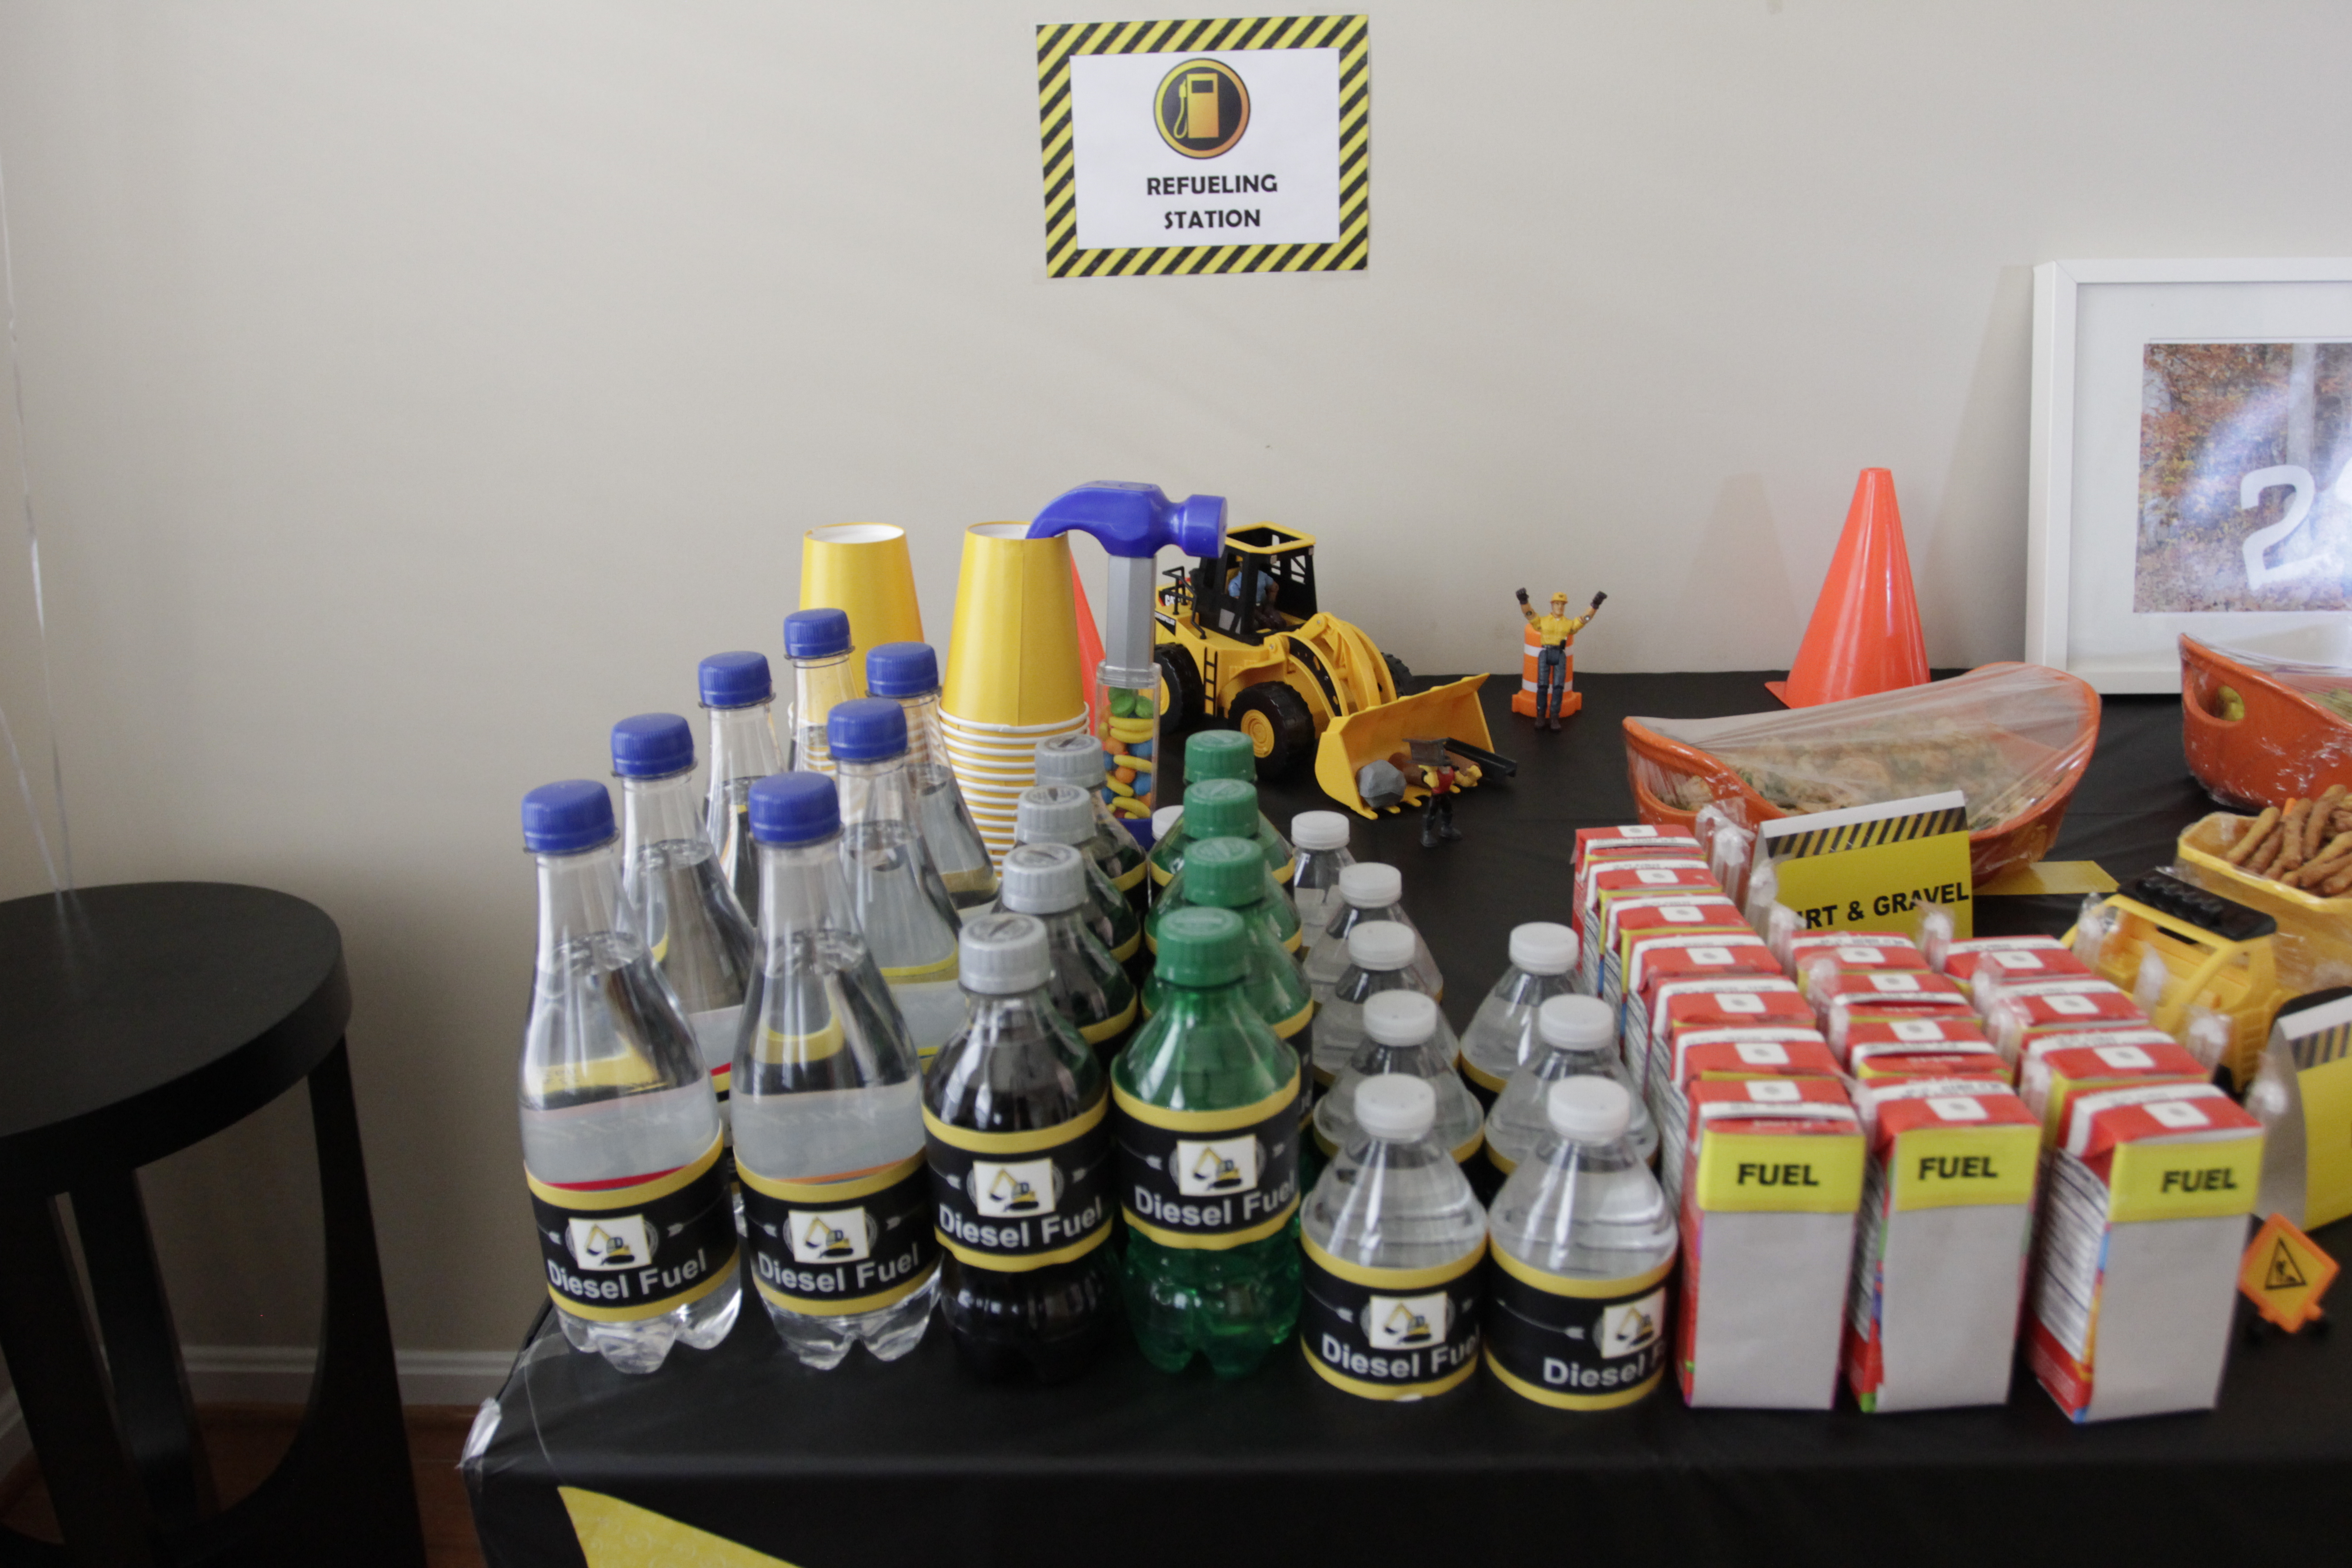 Construction Birthday Party "Fuels for the Kiddos"